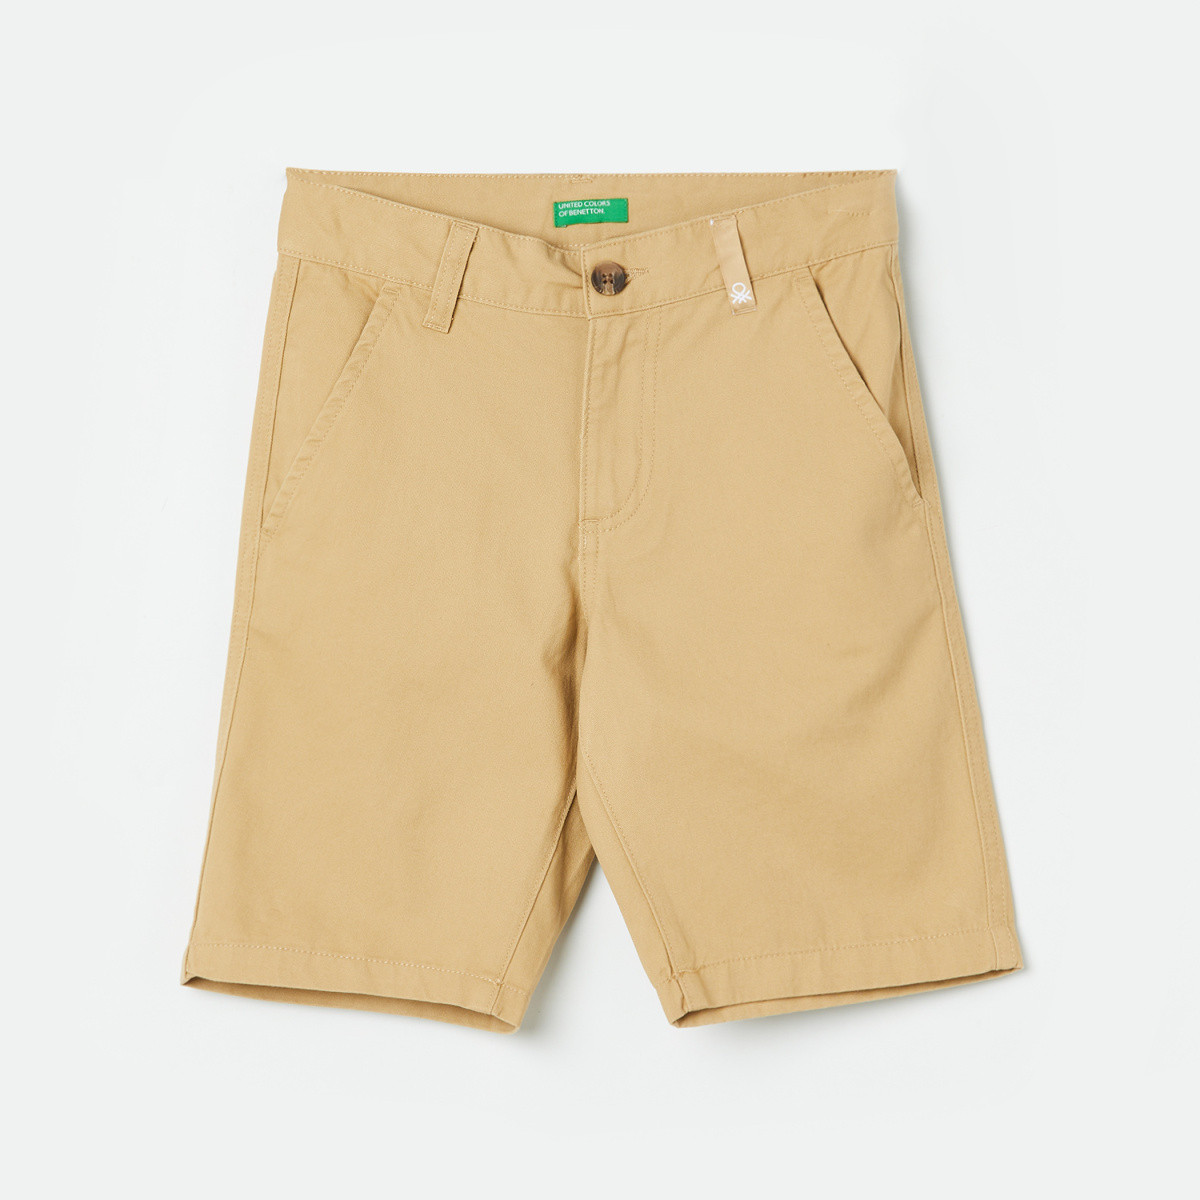 UNITED COLORS OF BENETTON Boys Solid Casual Shorts